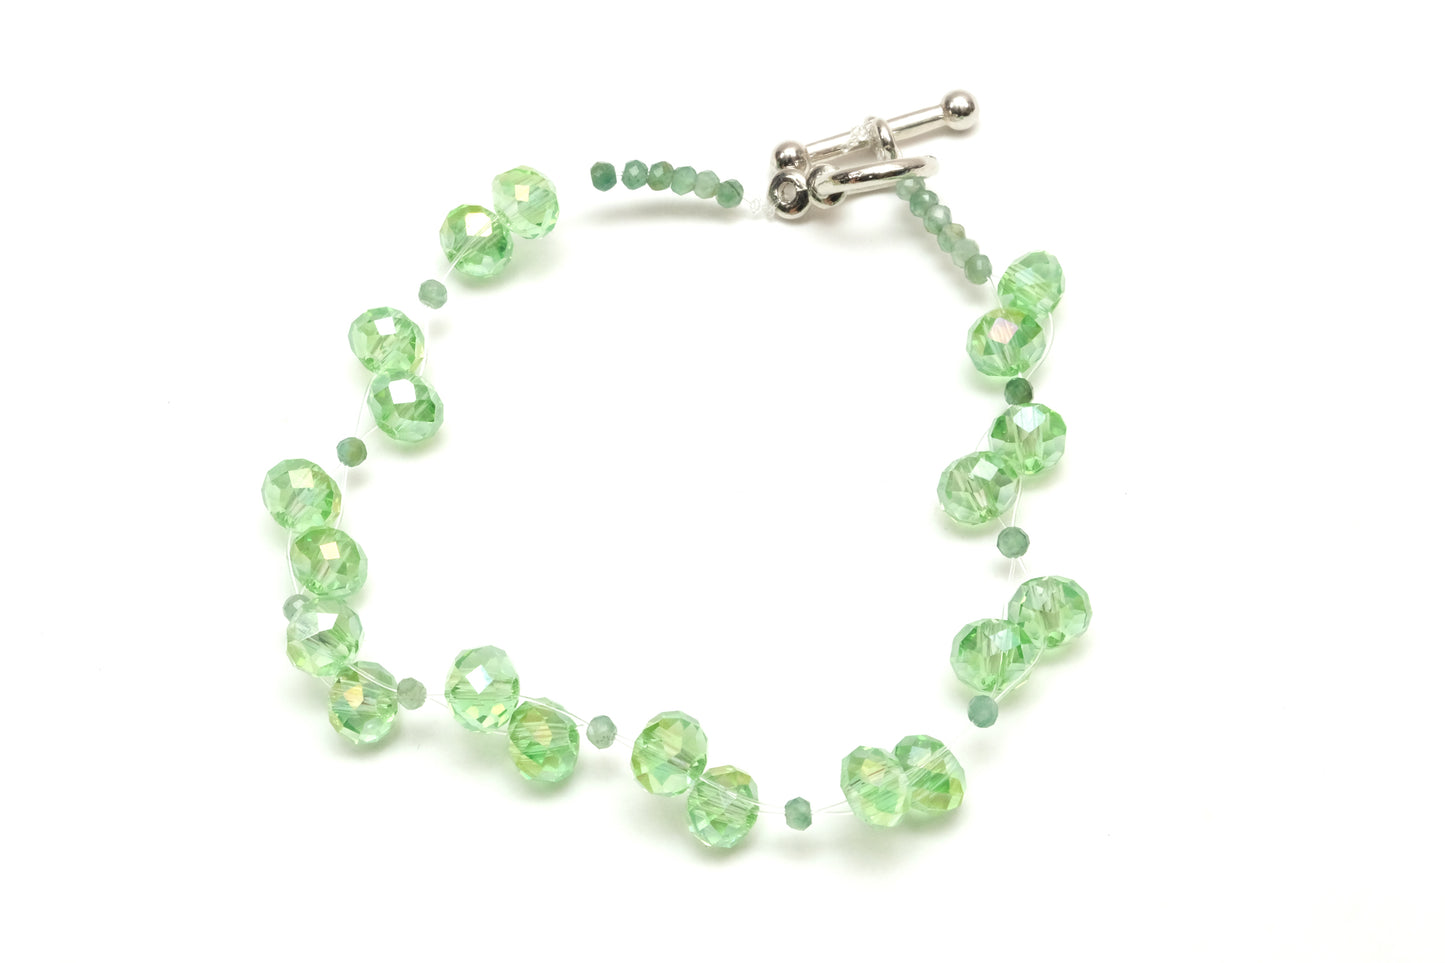 Dewi Maya Jewelry Bracelet Green Meadow available at the best boutique in Upstate South Carolina Spartanburg Greenville Dewi Maya Boutique